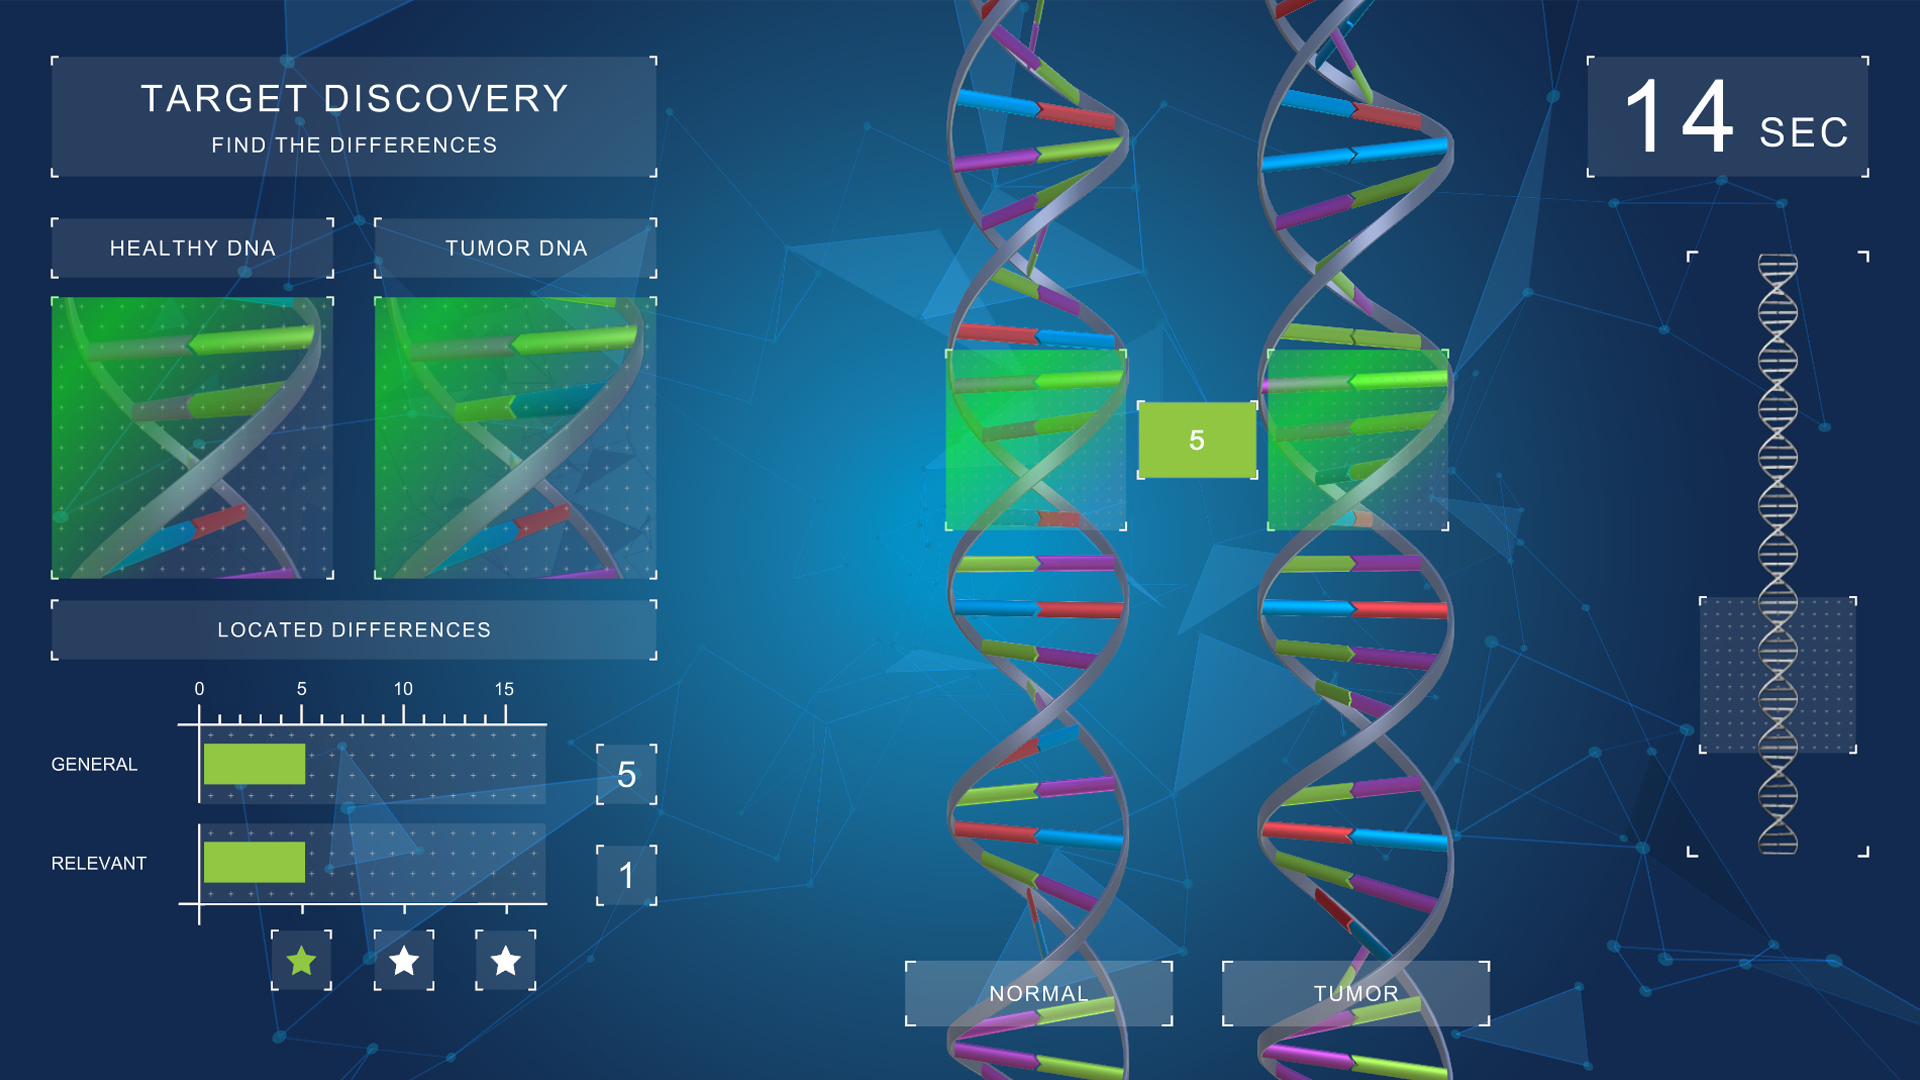 unity serious game target discovery für bayer unterschied dna strang